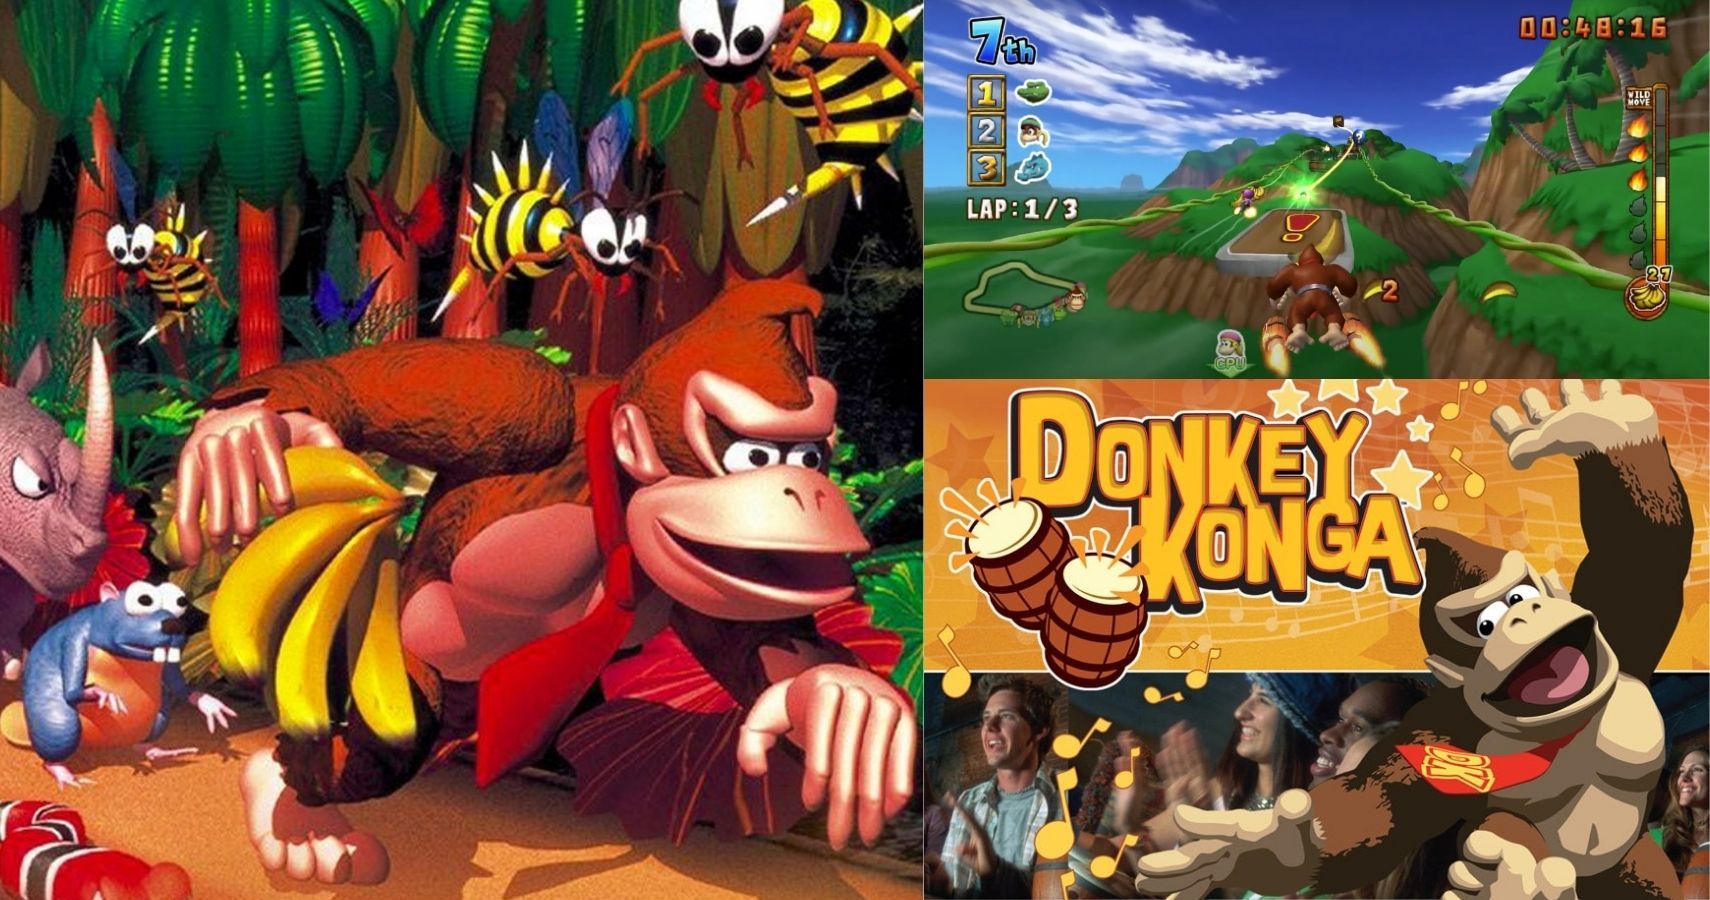 Every Donkey Kong Game Ranked